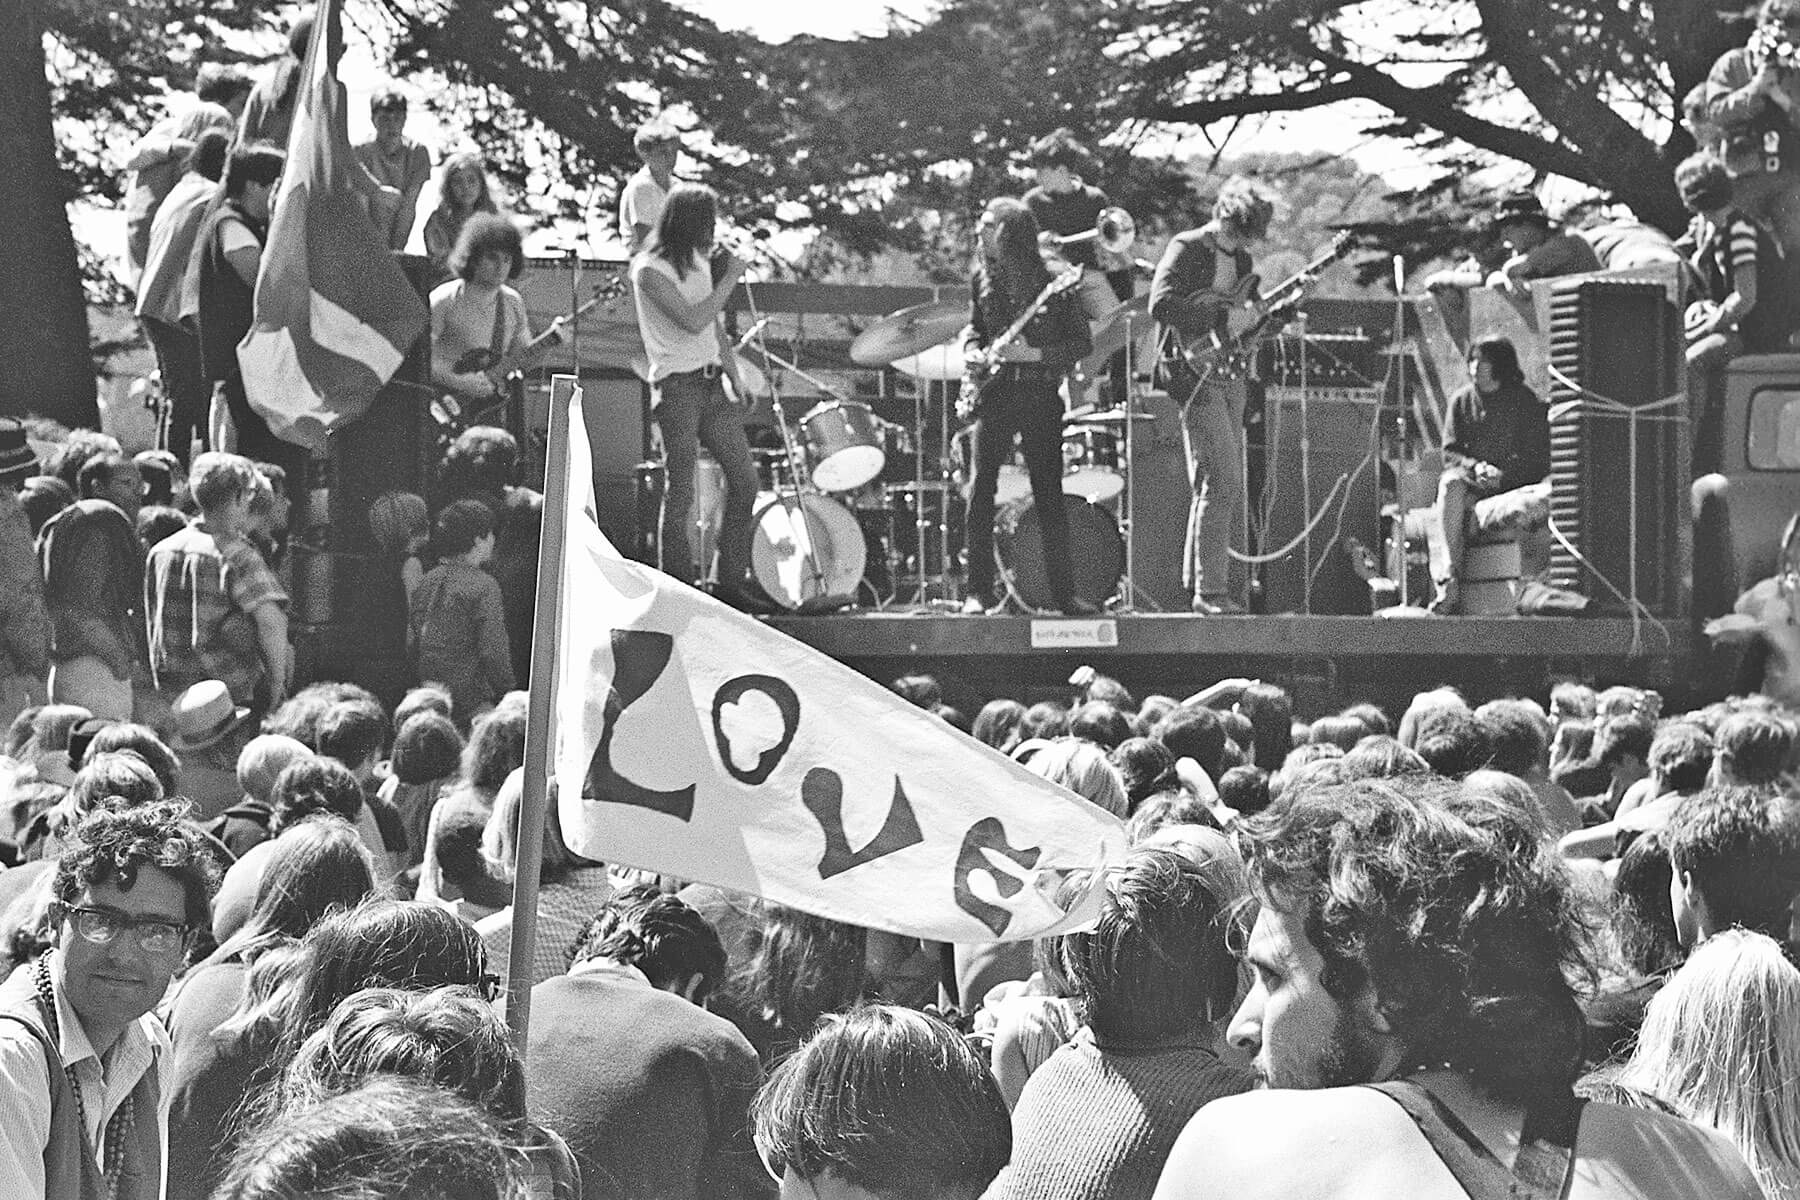 Hippies watching a band